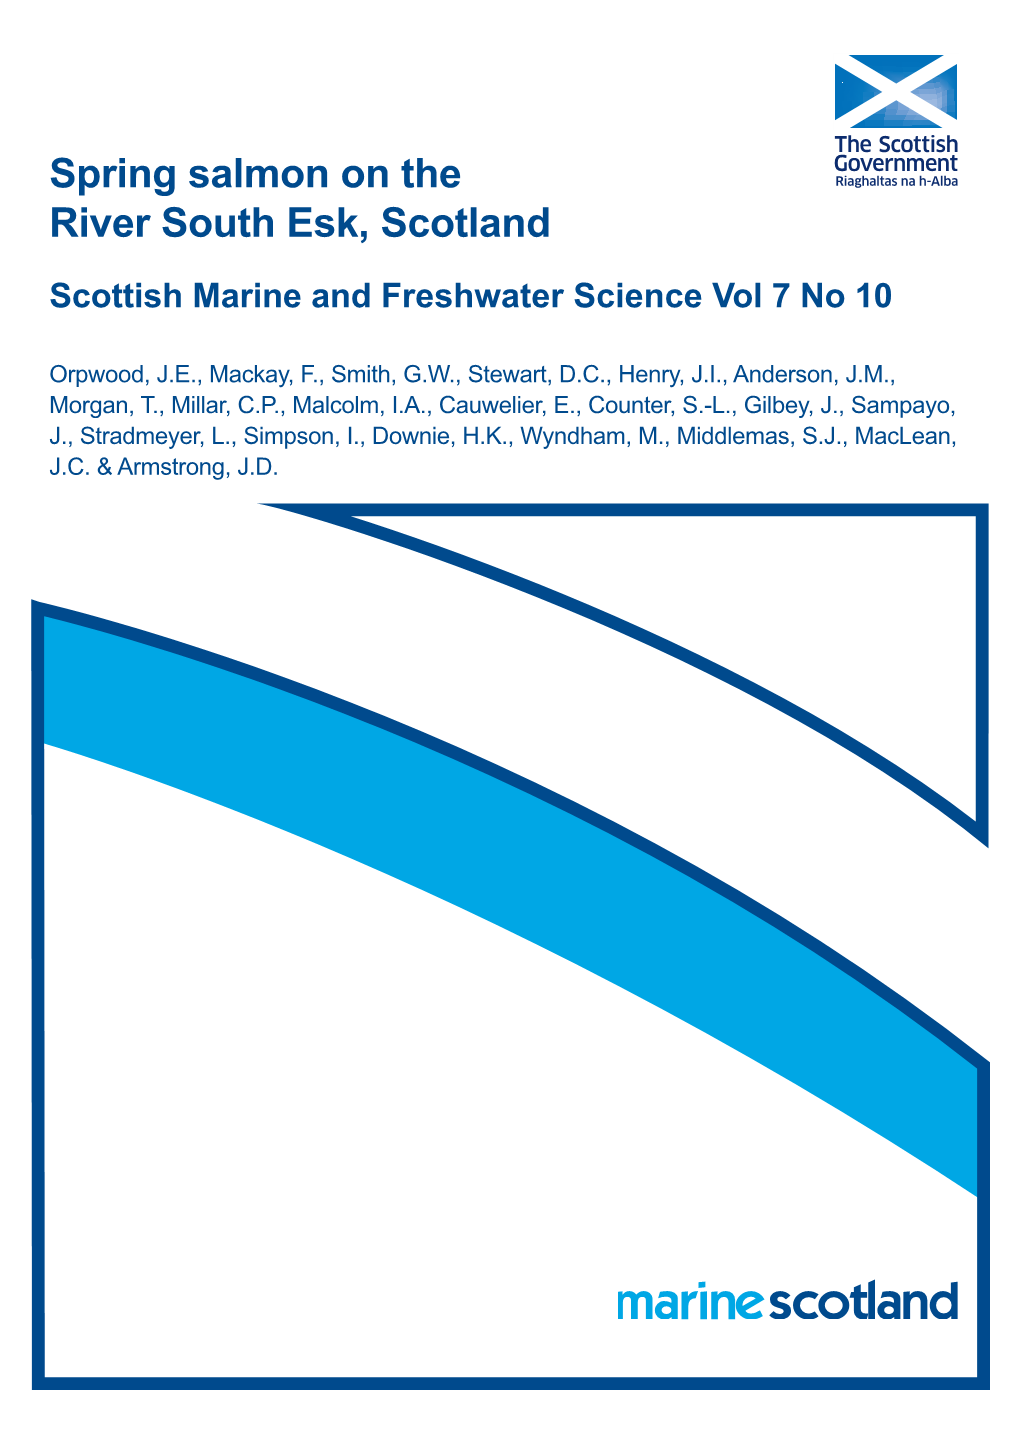 Spring Salmon on the River South Esk, Scotland Scottish Marine and Freshwater Science Vol 7 No 10